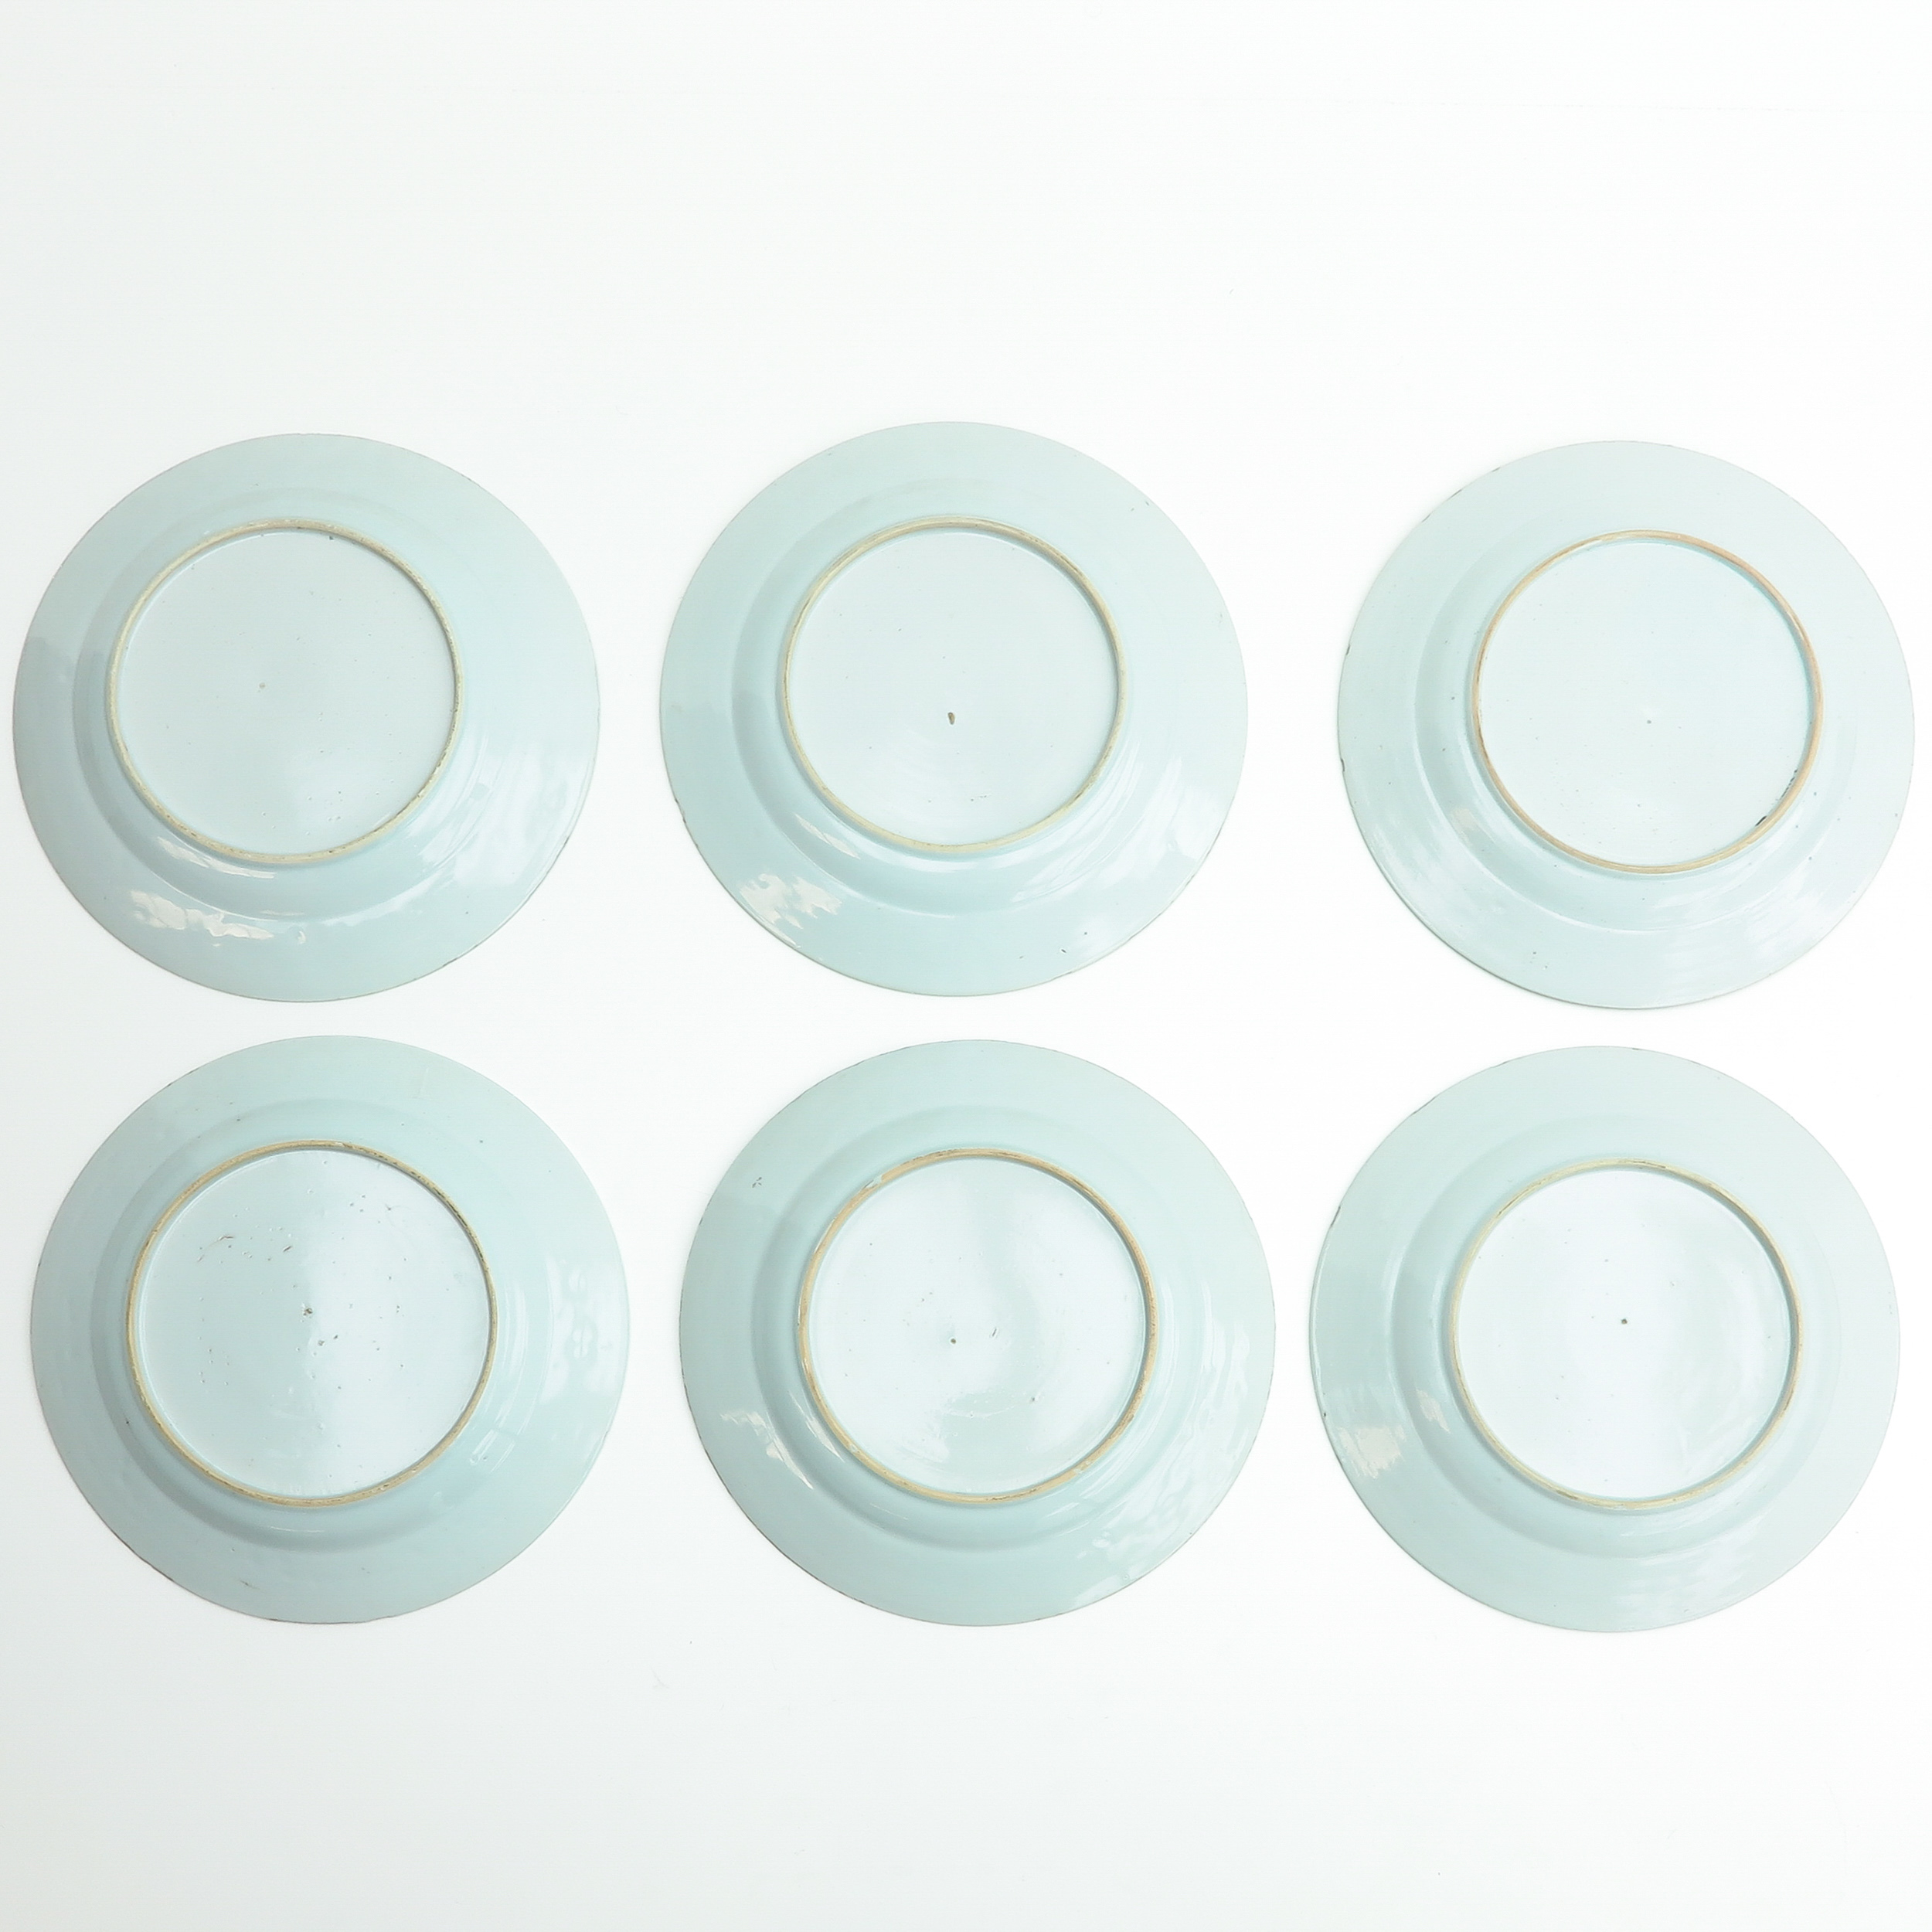 A Series of 6 Blue and White Plates - Image 2 of 9